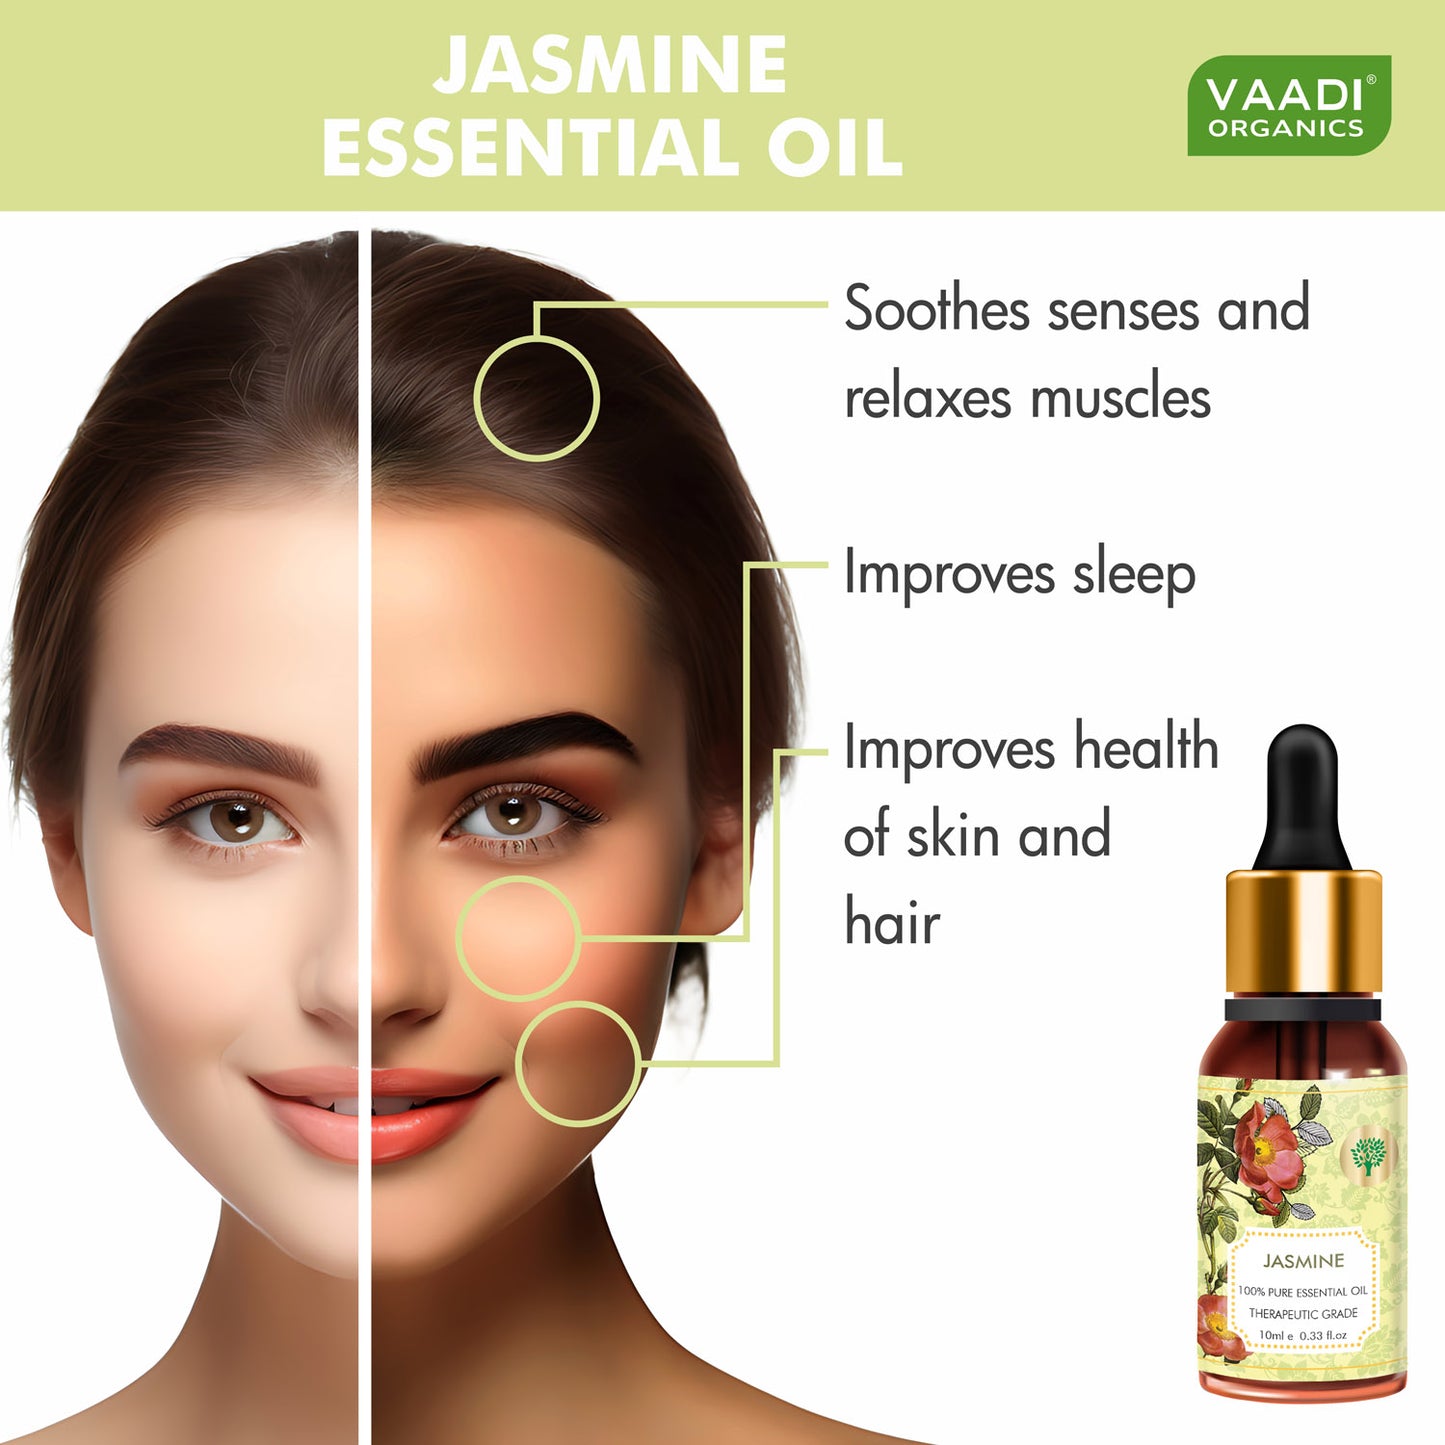 Jasmine Essential Oil - Nourishes Dry & Damaged Hair, Improves Sleep, Uplifts Mood, Reduces Acne & Blemishes - 100% Pure Therapeutic Grade (10 ml)